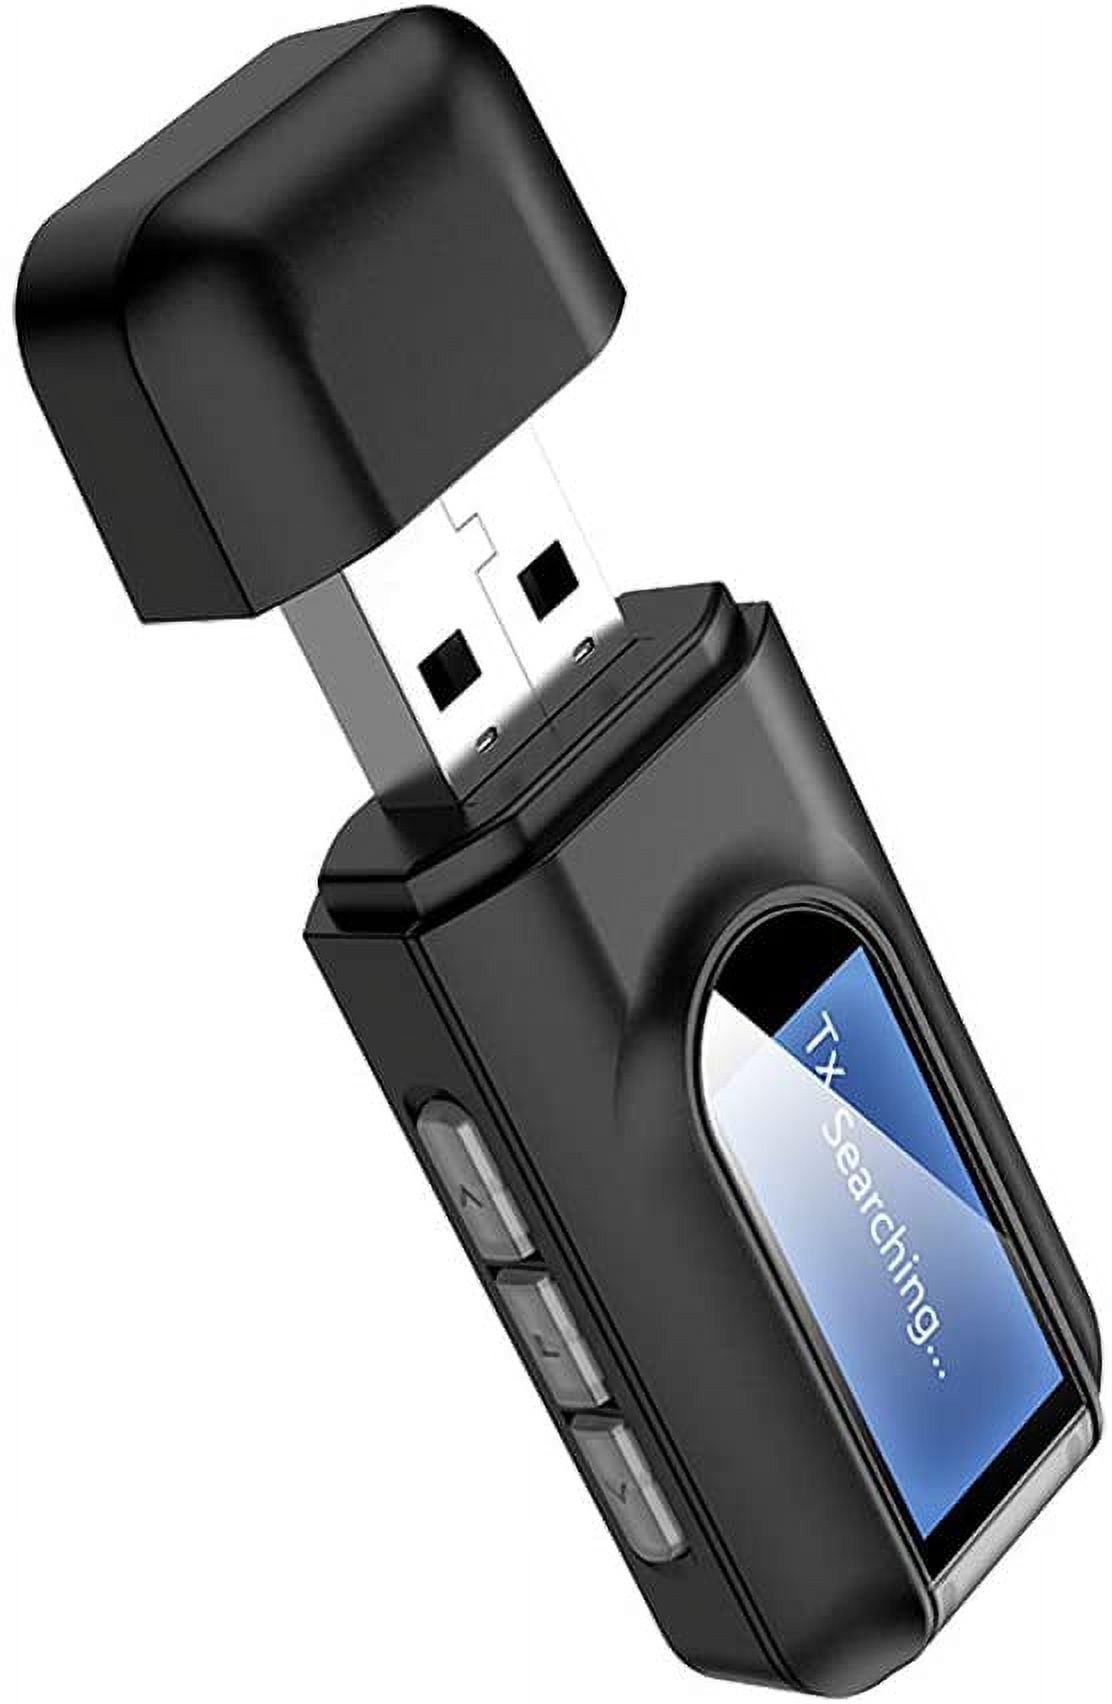 Olixar Multi Pairing Wireless Bluetooth Headset Dongle For PS5